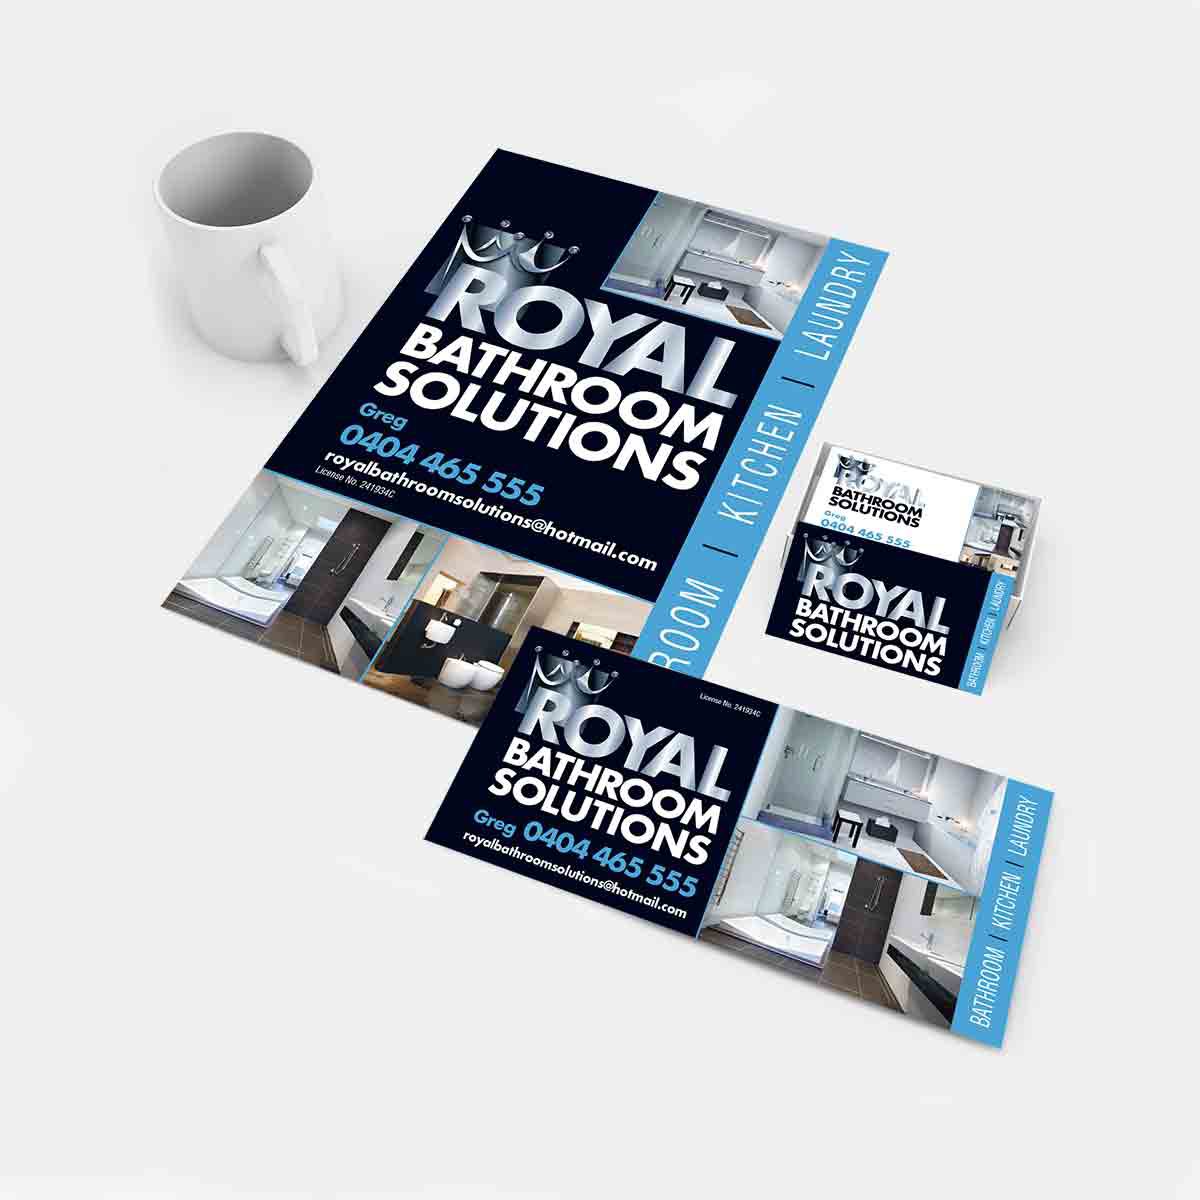 Royal Solutions Brand Identity designed by Linda Butler of GGA Graphics